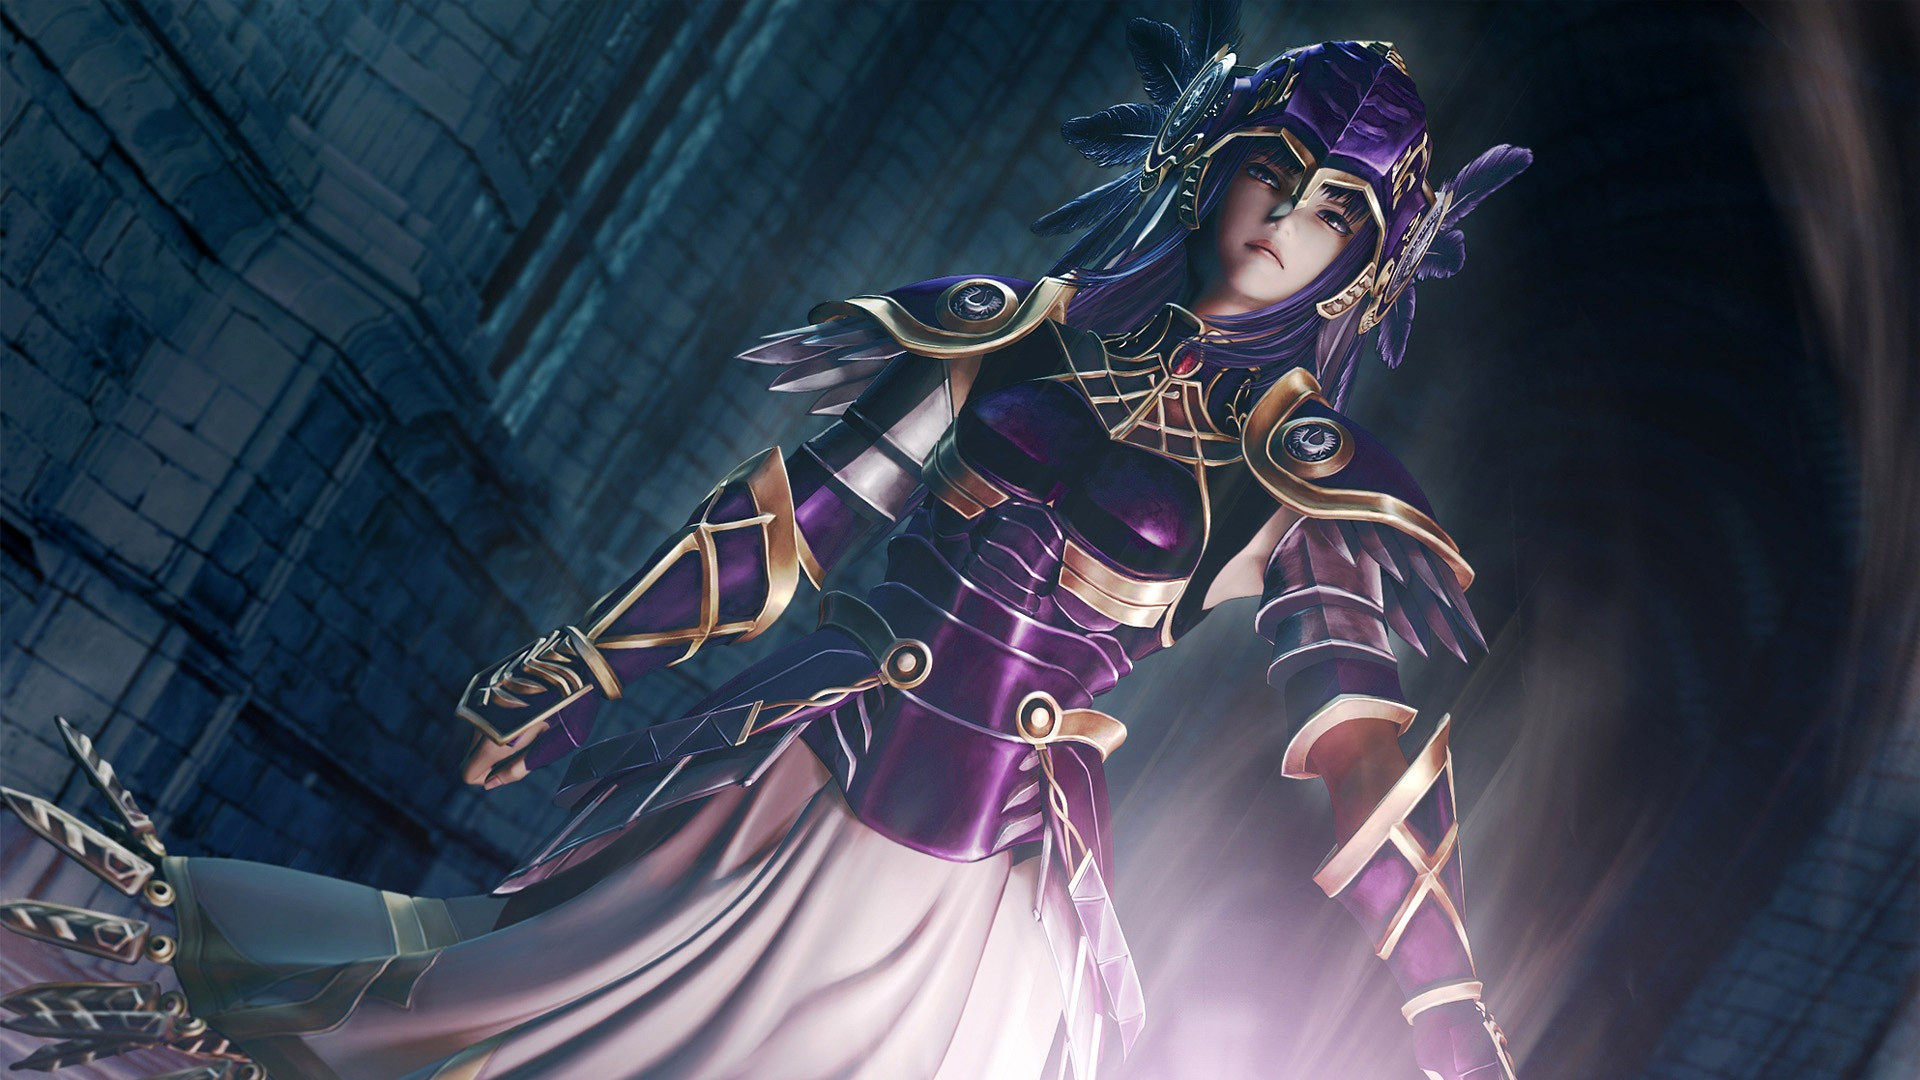 Profile - Hrist Valkyrie Profile 2 , HD Wallpaper & Backgrounds